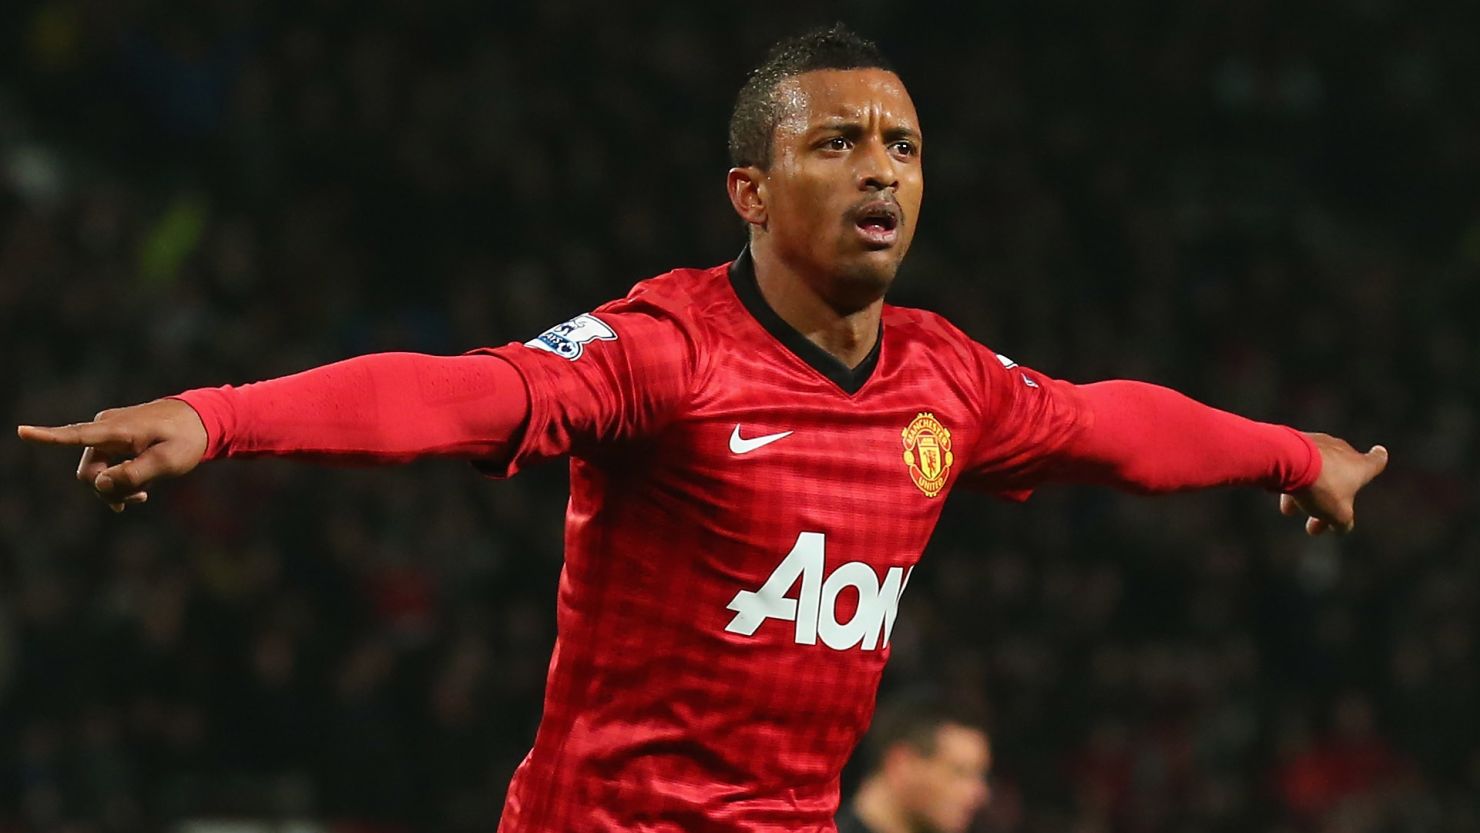 Nani was on target as Manchester United moved into the quarterfinals of the FA Cup